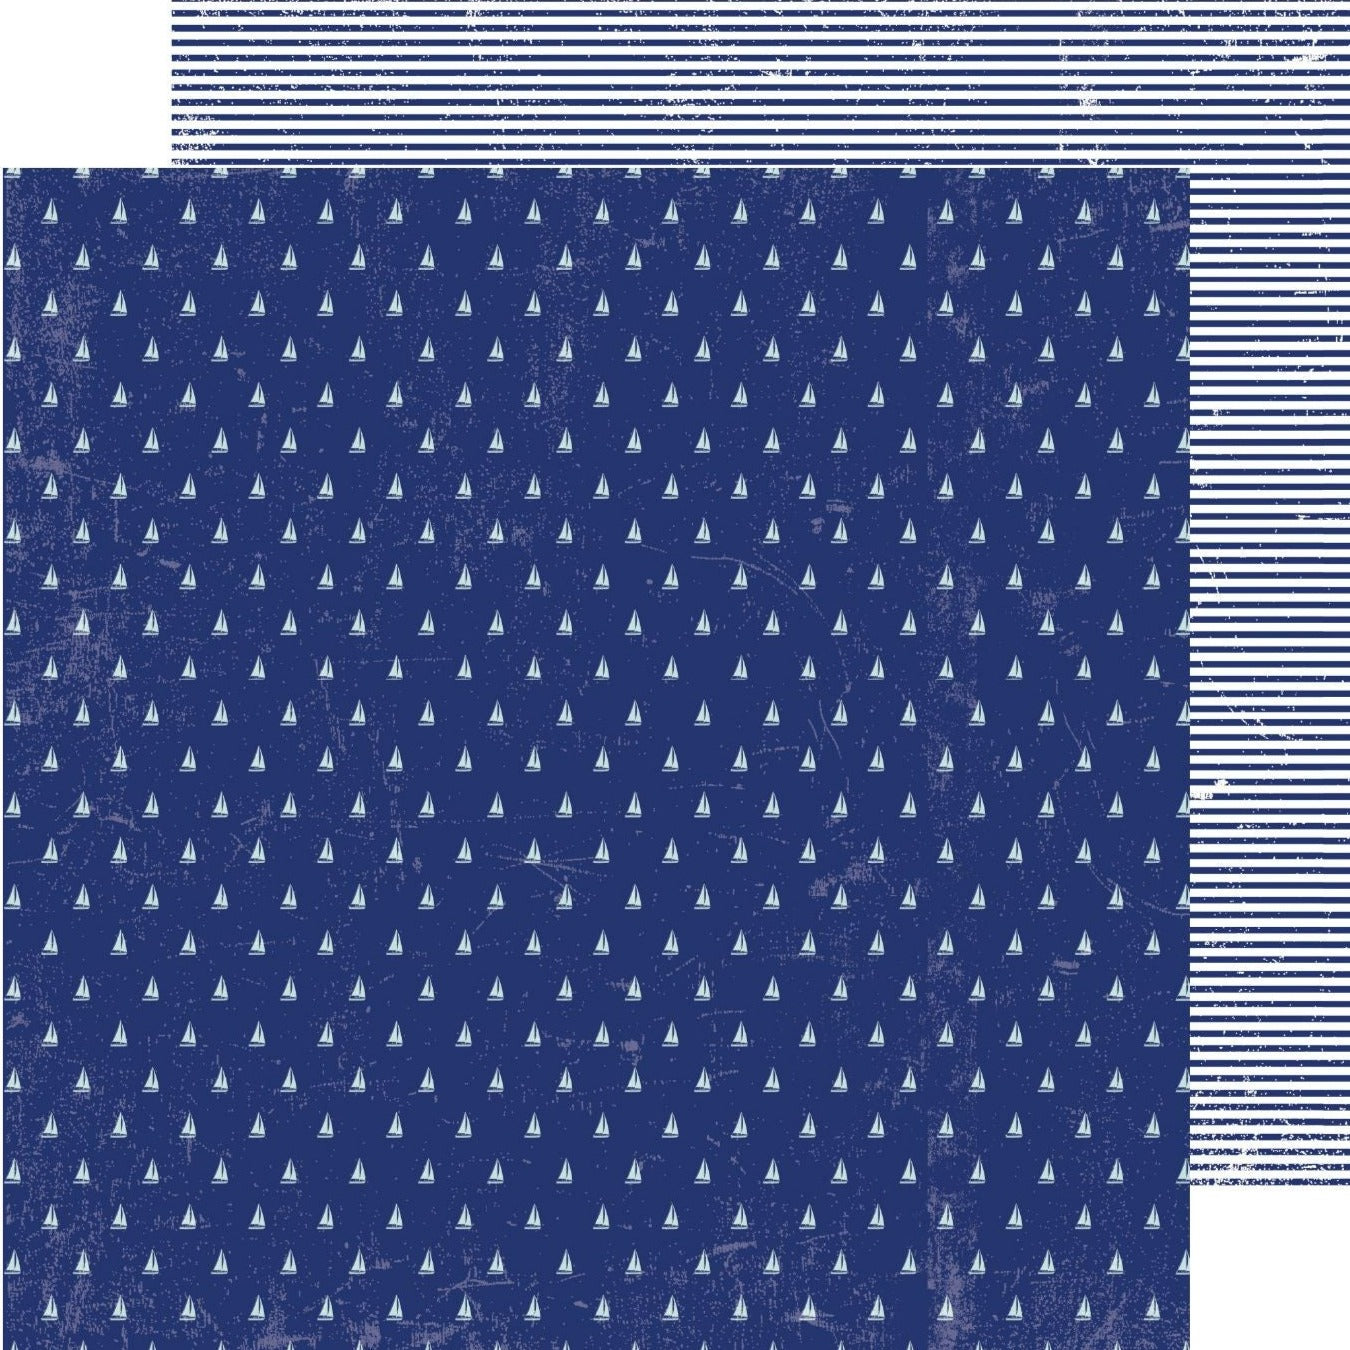 It is printed on two sides (Side A - tiny sailboats in white on a blue distressed background, Side B - thin blue & white stripes)—archival quality, acid-free.